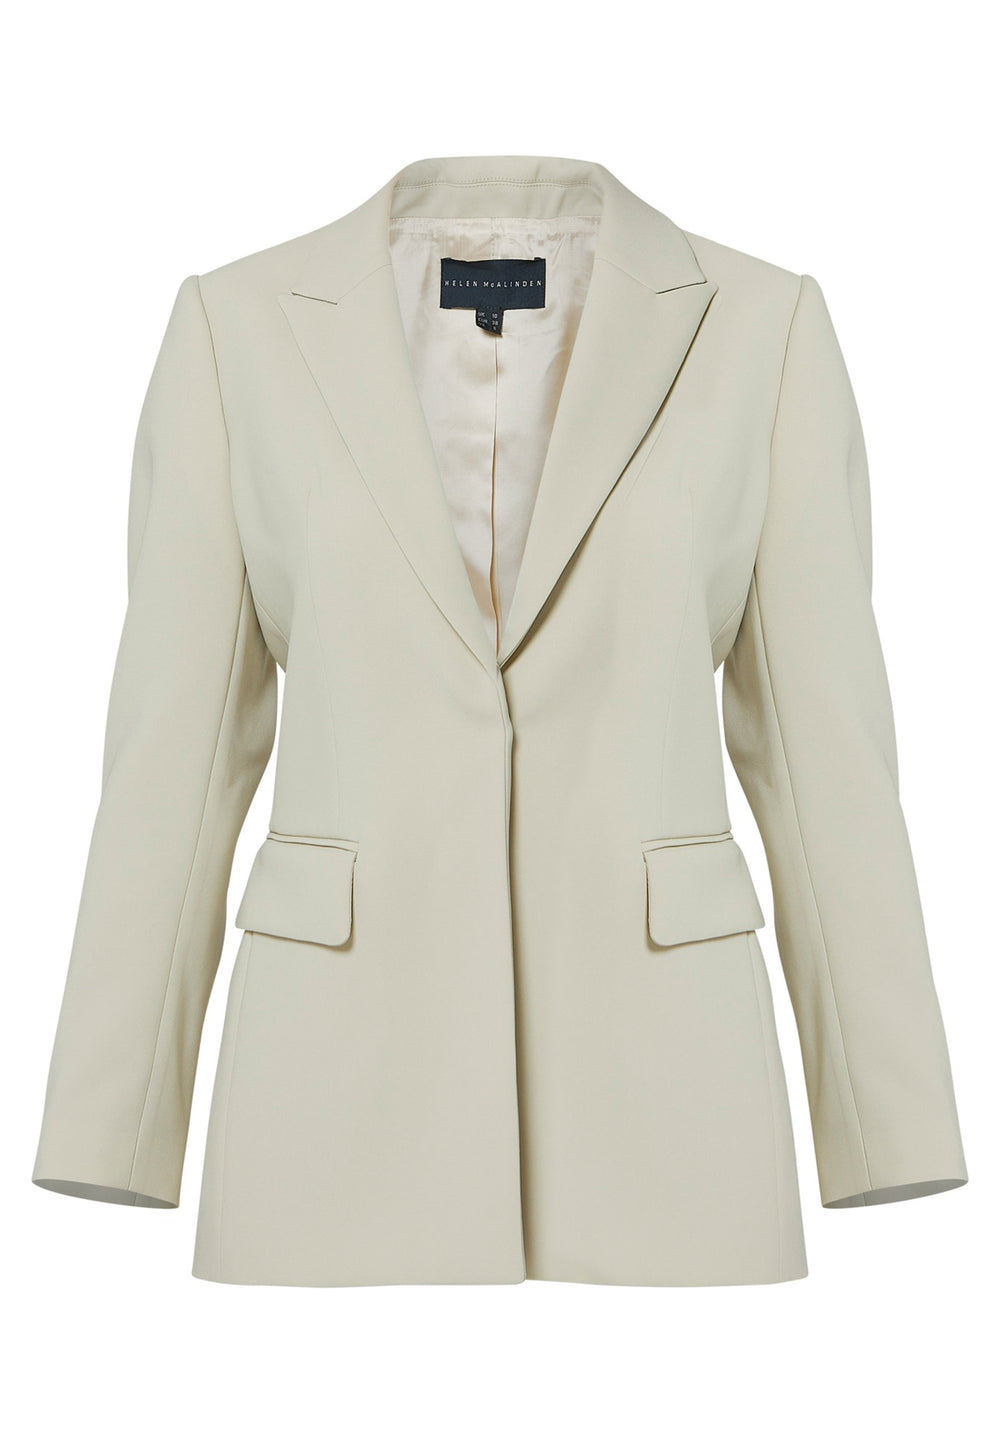 Jade offers a contemporary twist on the classic blazer, now available in a sophisticated bone hue to perfectly complement the matching trousers. This easy-fit jacket features a sporty white and bone stripe trim on the sleeve and cross back, adding a modern touch to its design. Crafted in our signature double crepe with a hint of stretch, Jade ensures both style and comfort, making it a versatile addition to your wardrobe.